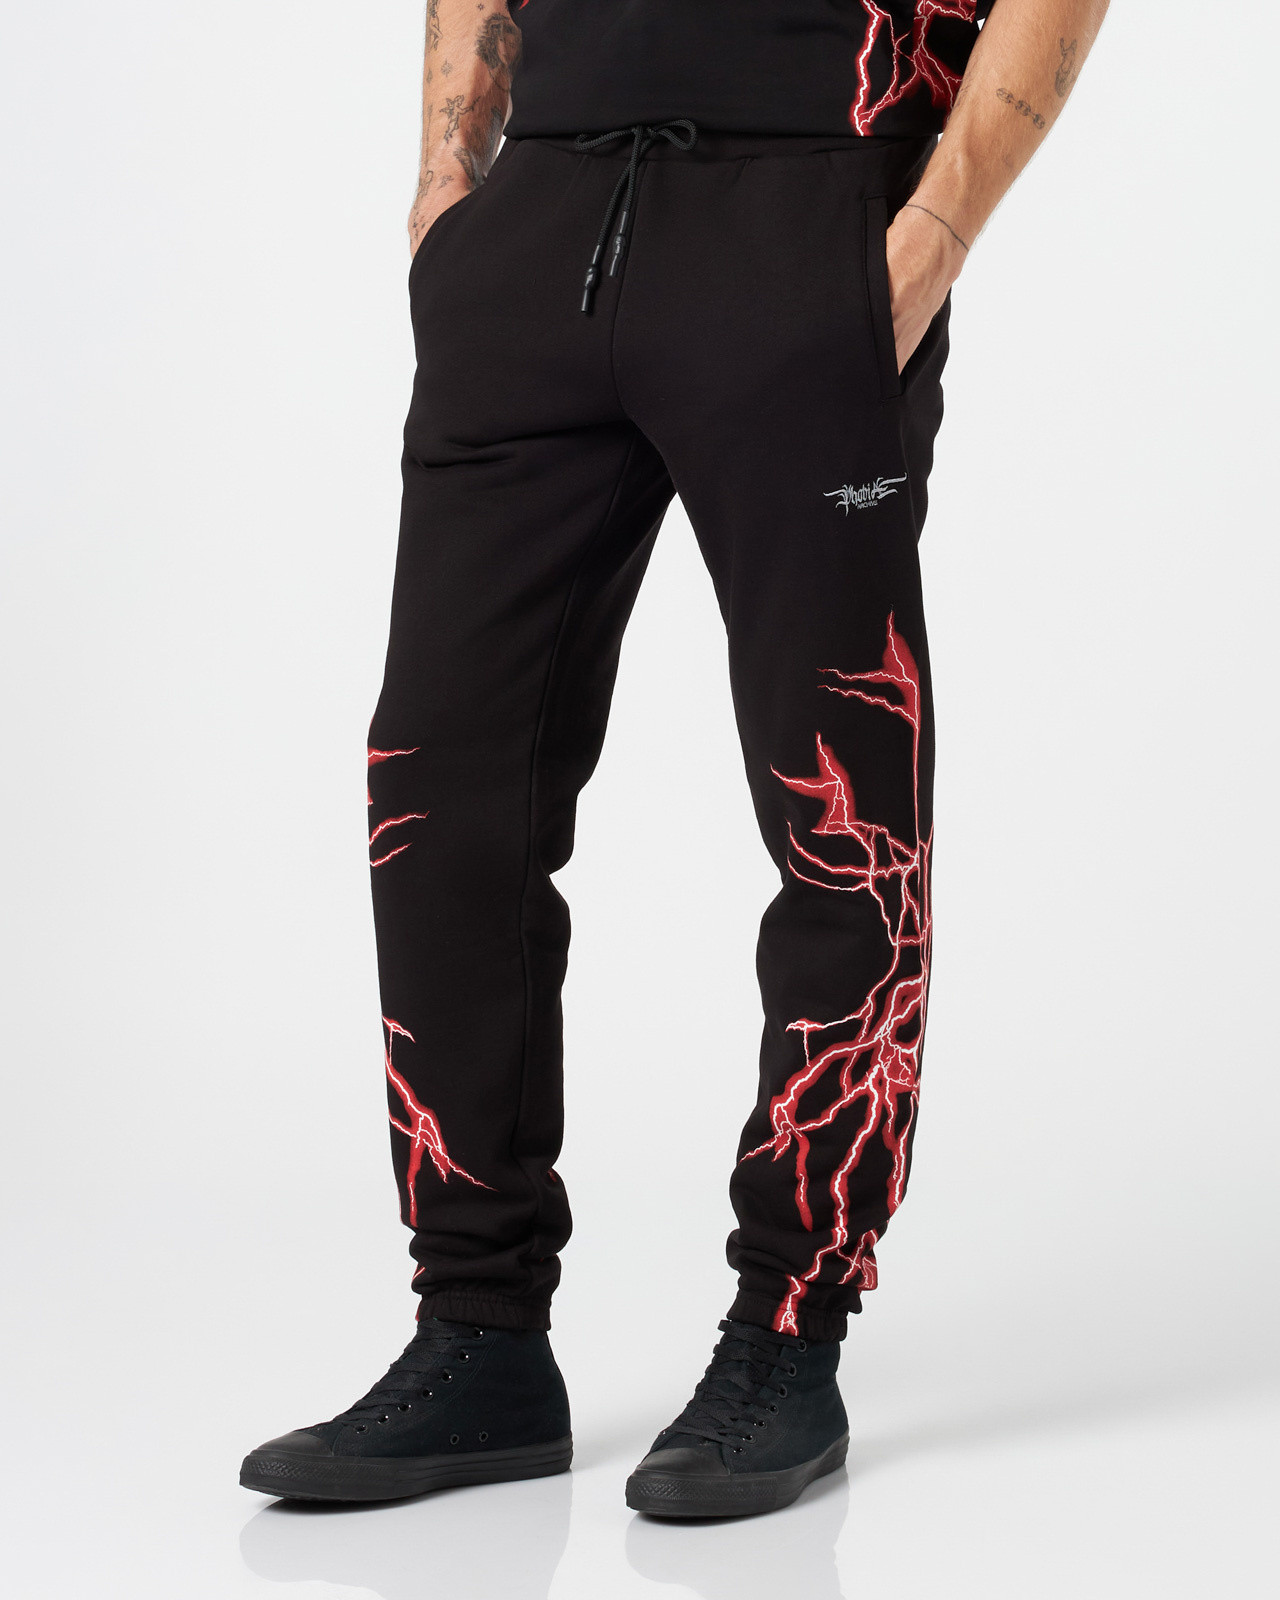 Phobia - Cotton trousers with lightning bolt print, Black, large image number 1